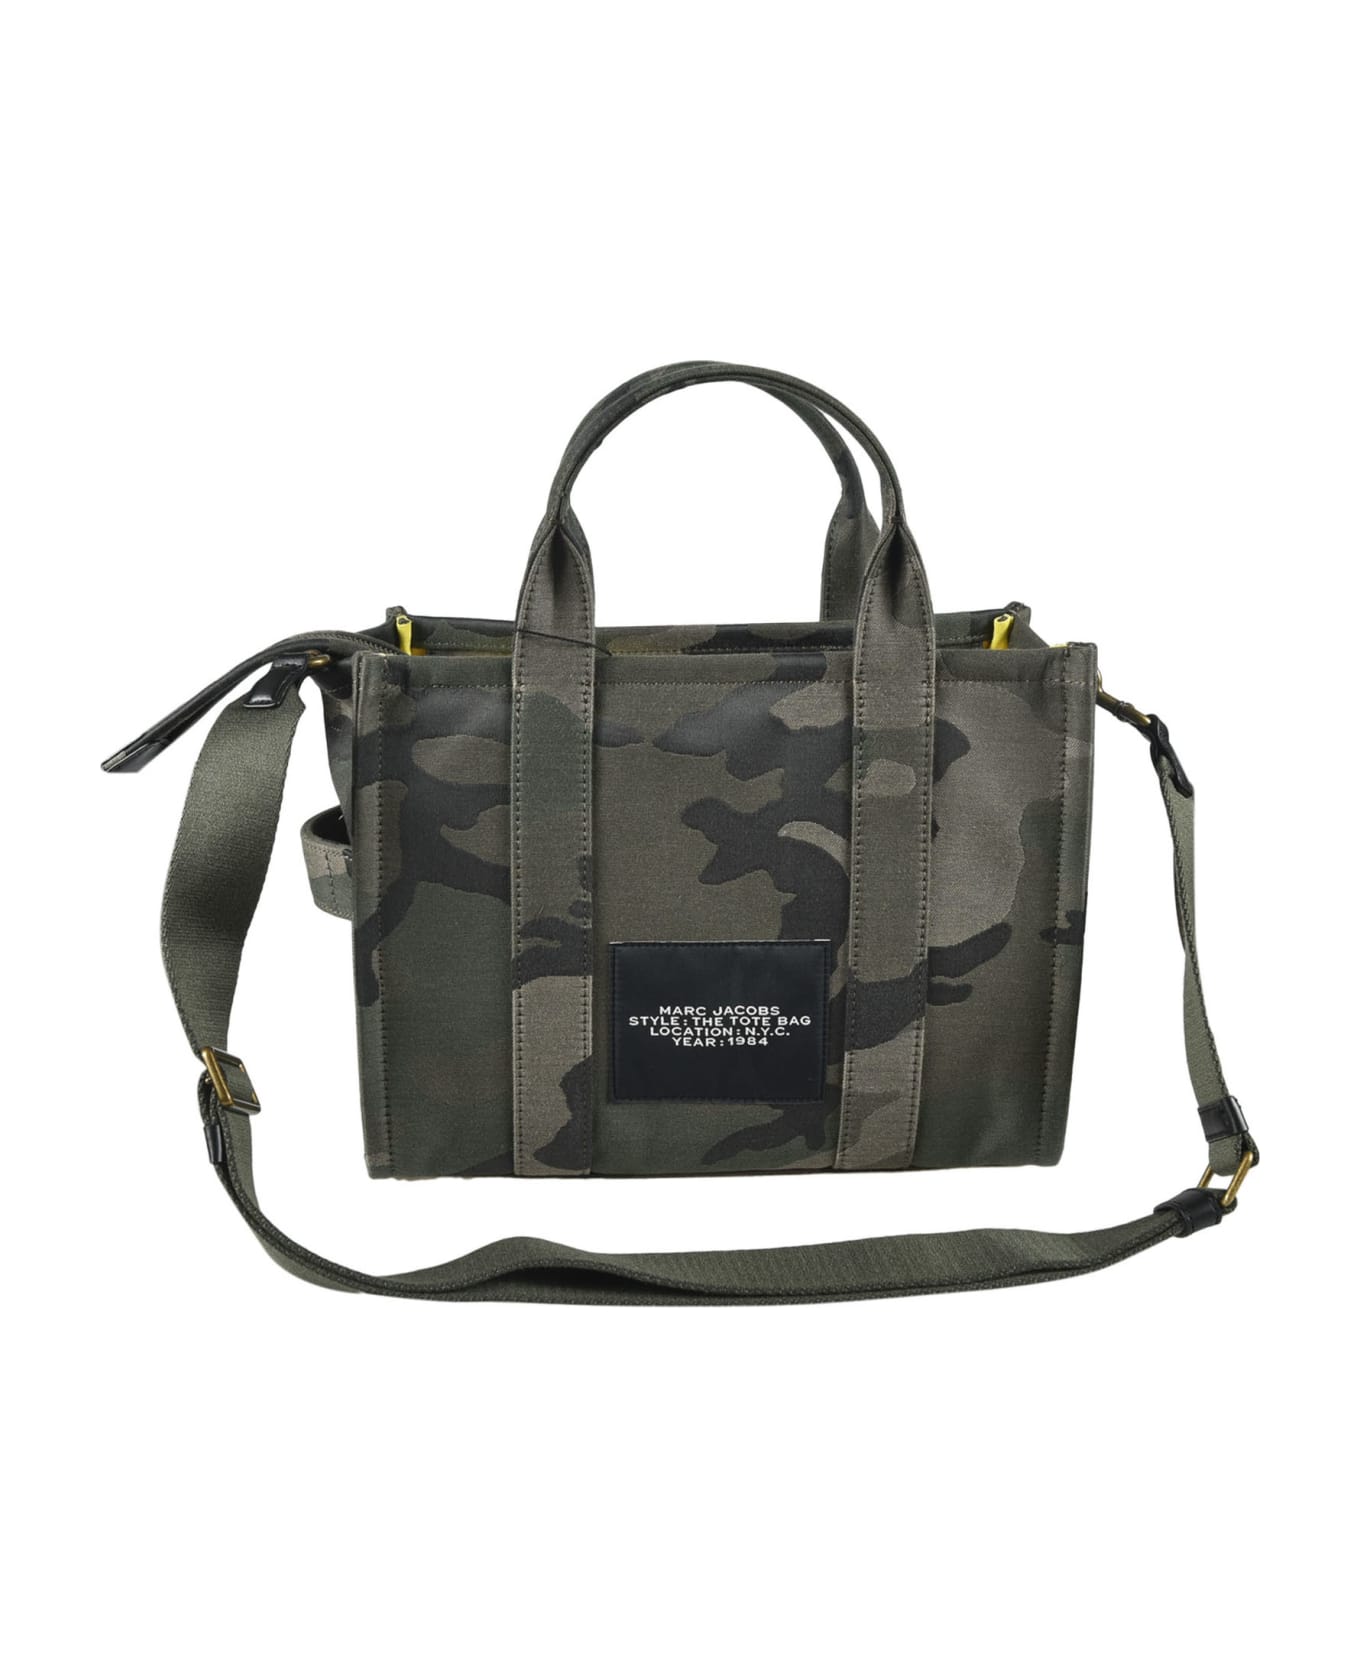 Marc Jacobs The Tote Bag Patched Tote - Camo/Multicolor